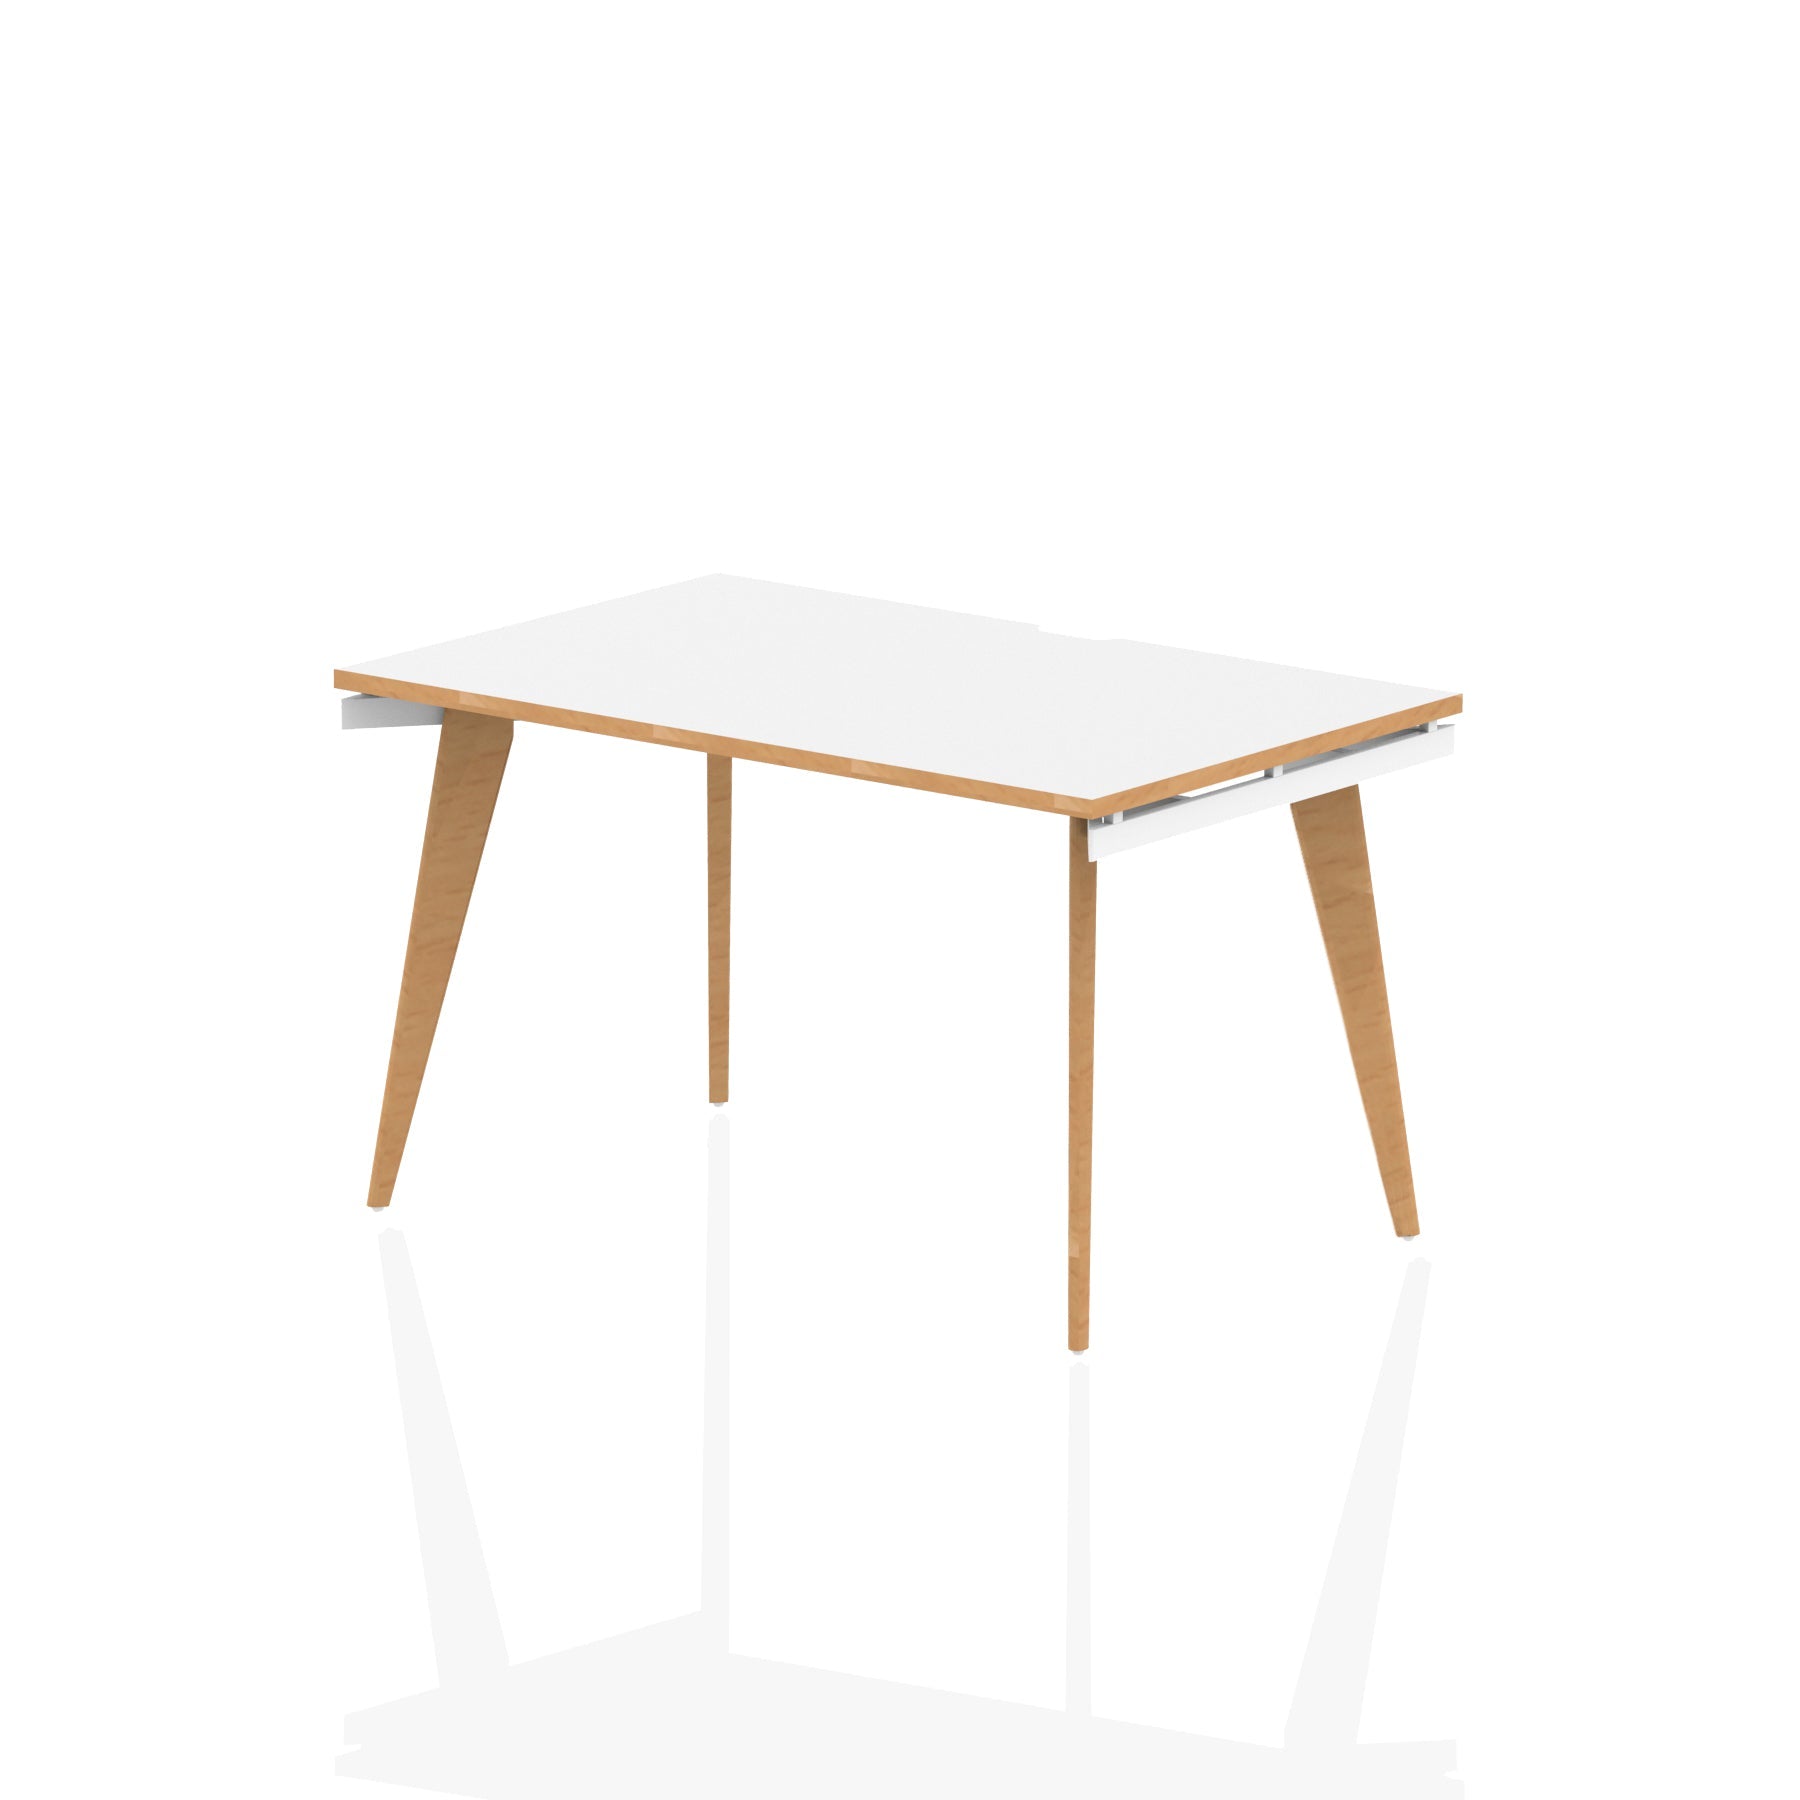 Oslo Starter Desk - Rectangular MFC Table, Self-Assembly, Wooden Legs, Natural Wood Frame, 5-Year Guarantee, 1200/1400/1600x800mm